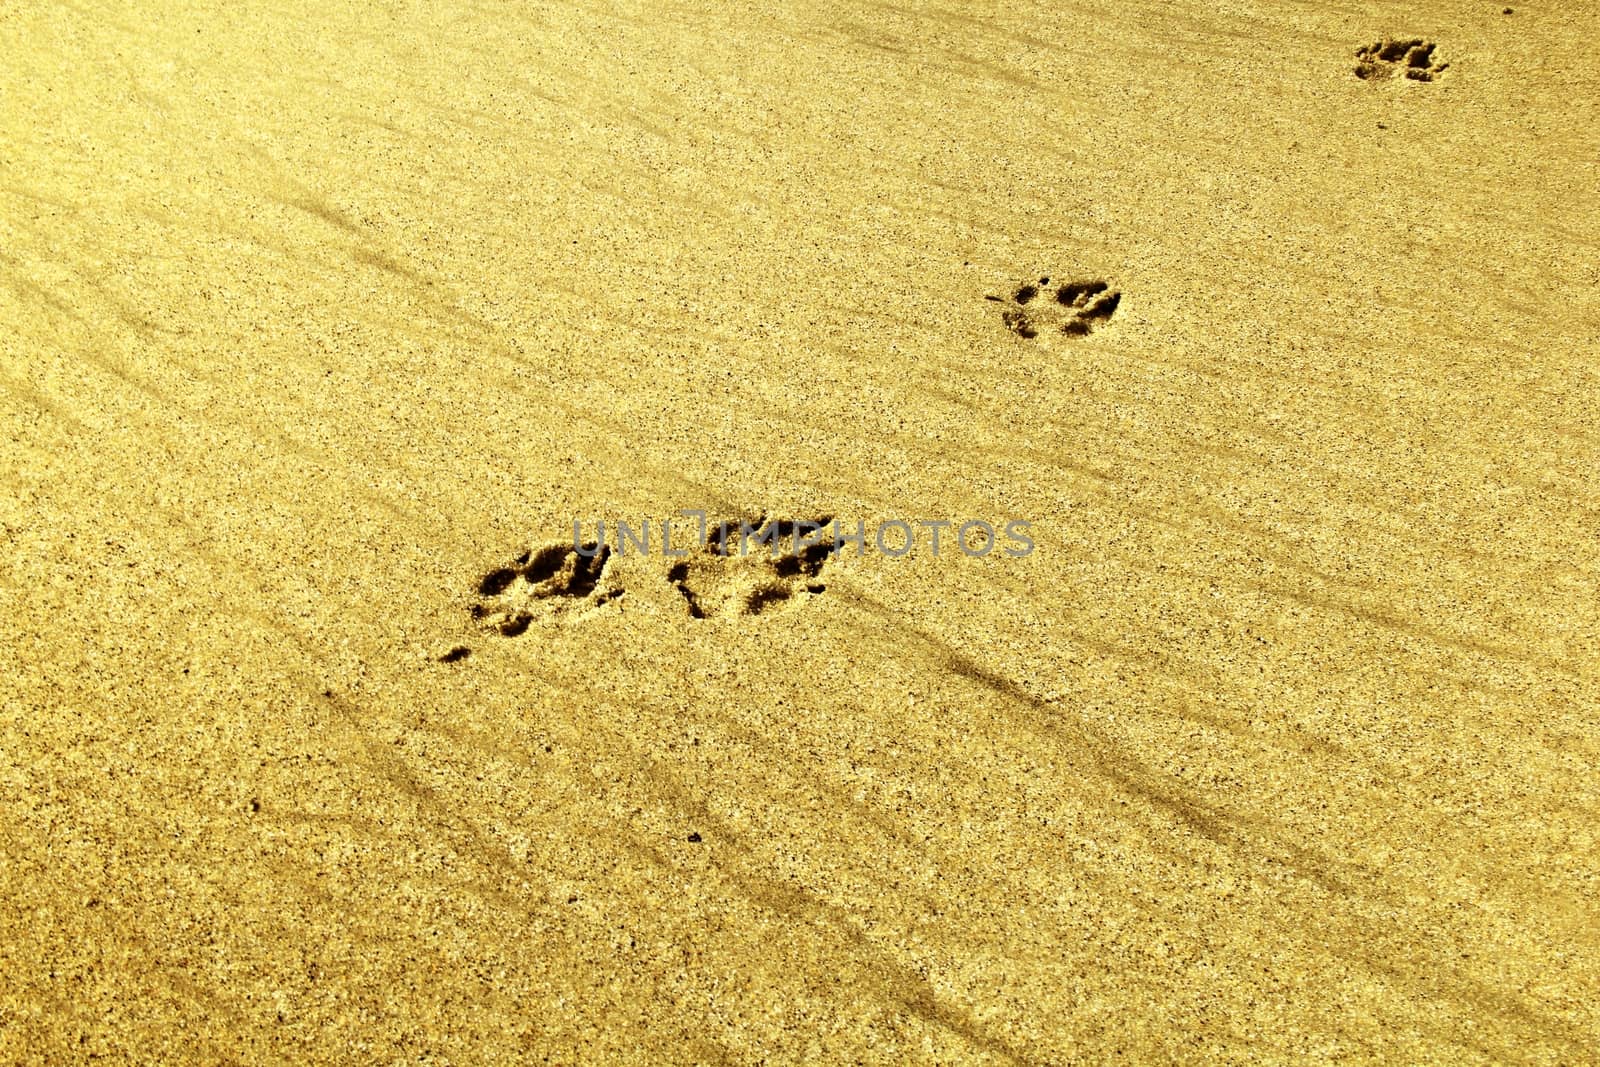 Dog footprint on the sand by Timmi